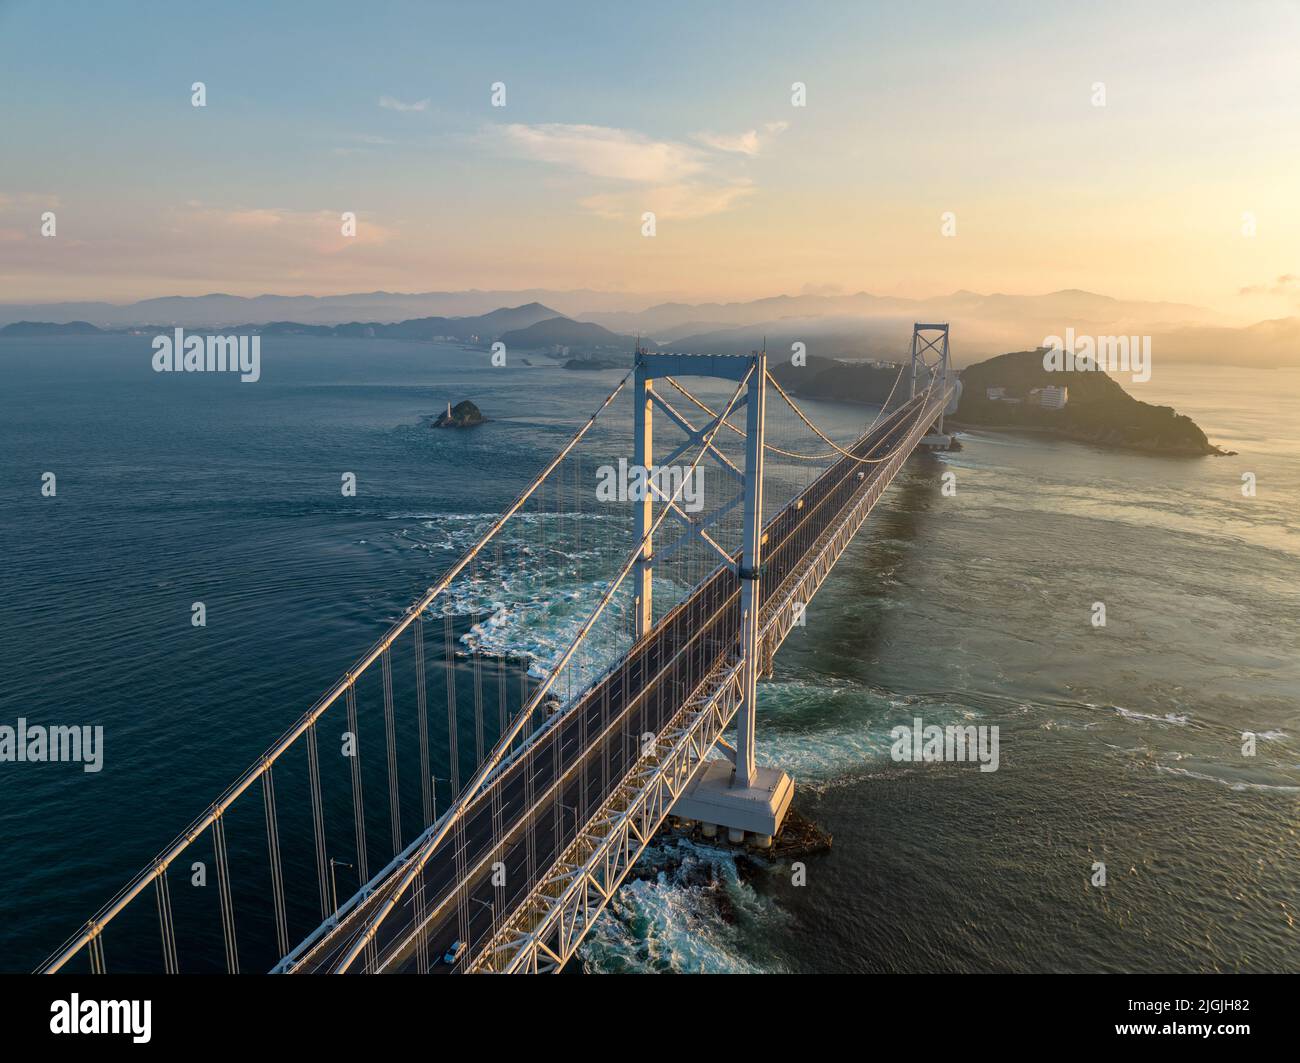 Overhead view of span with light traffic on suspension bridge at sunset Stock Photo